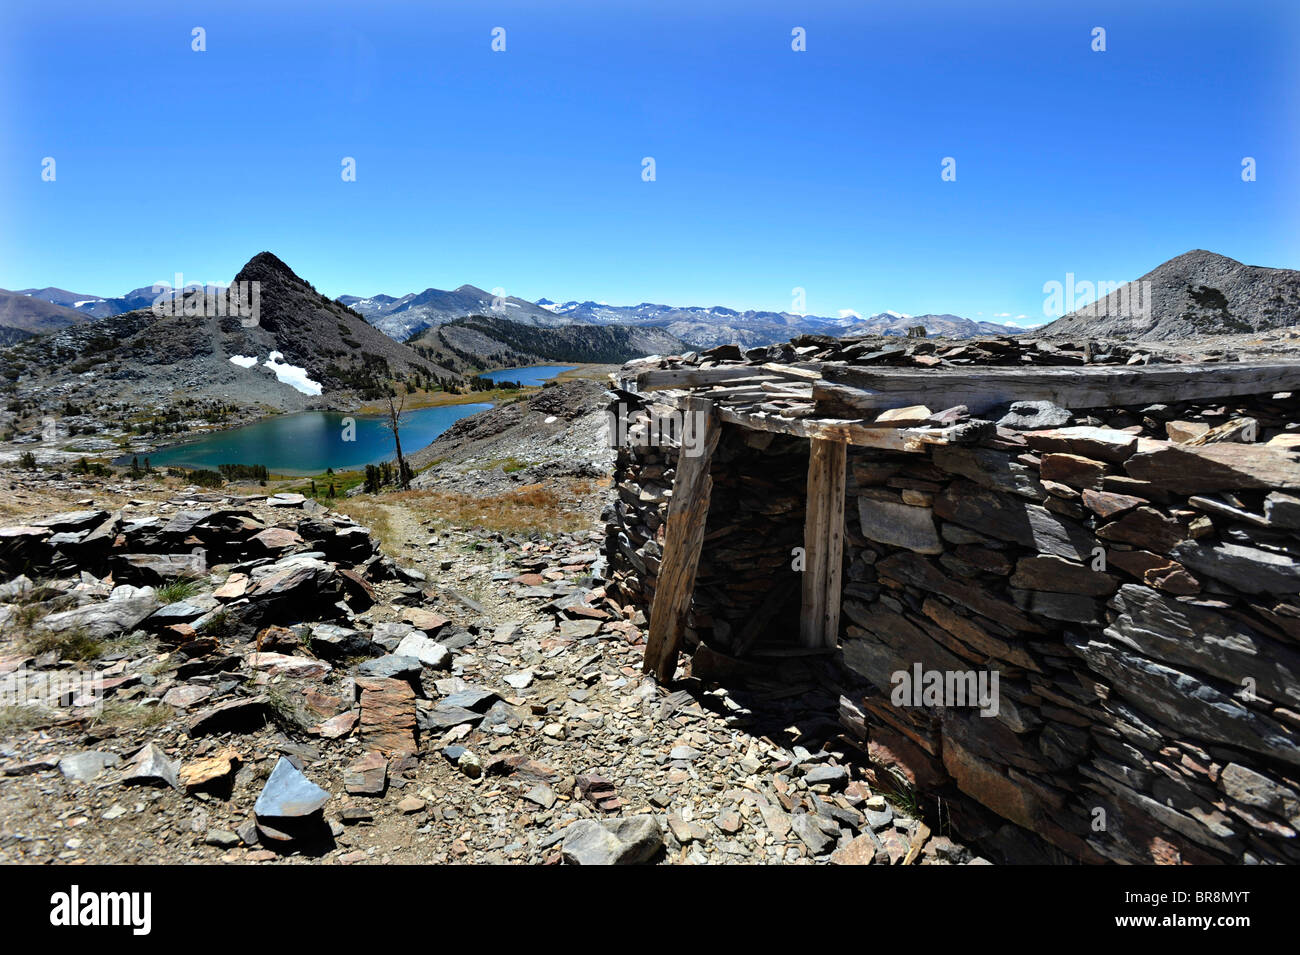 The ruins of an old miners cottage lie 1500 ft above the Tioga Pass in the Sierra Nevada range. Stock Photo